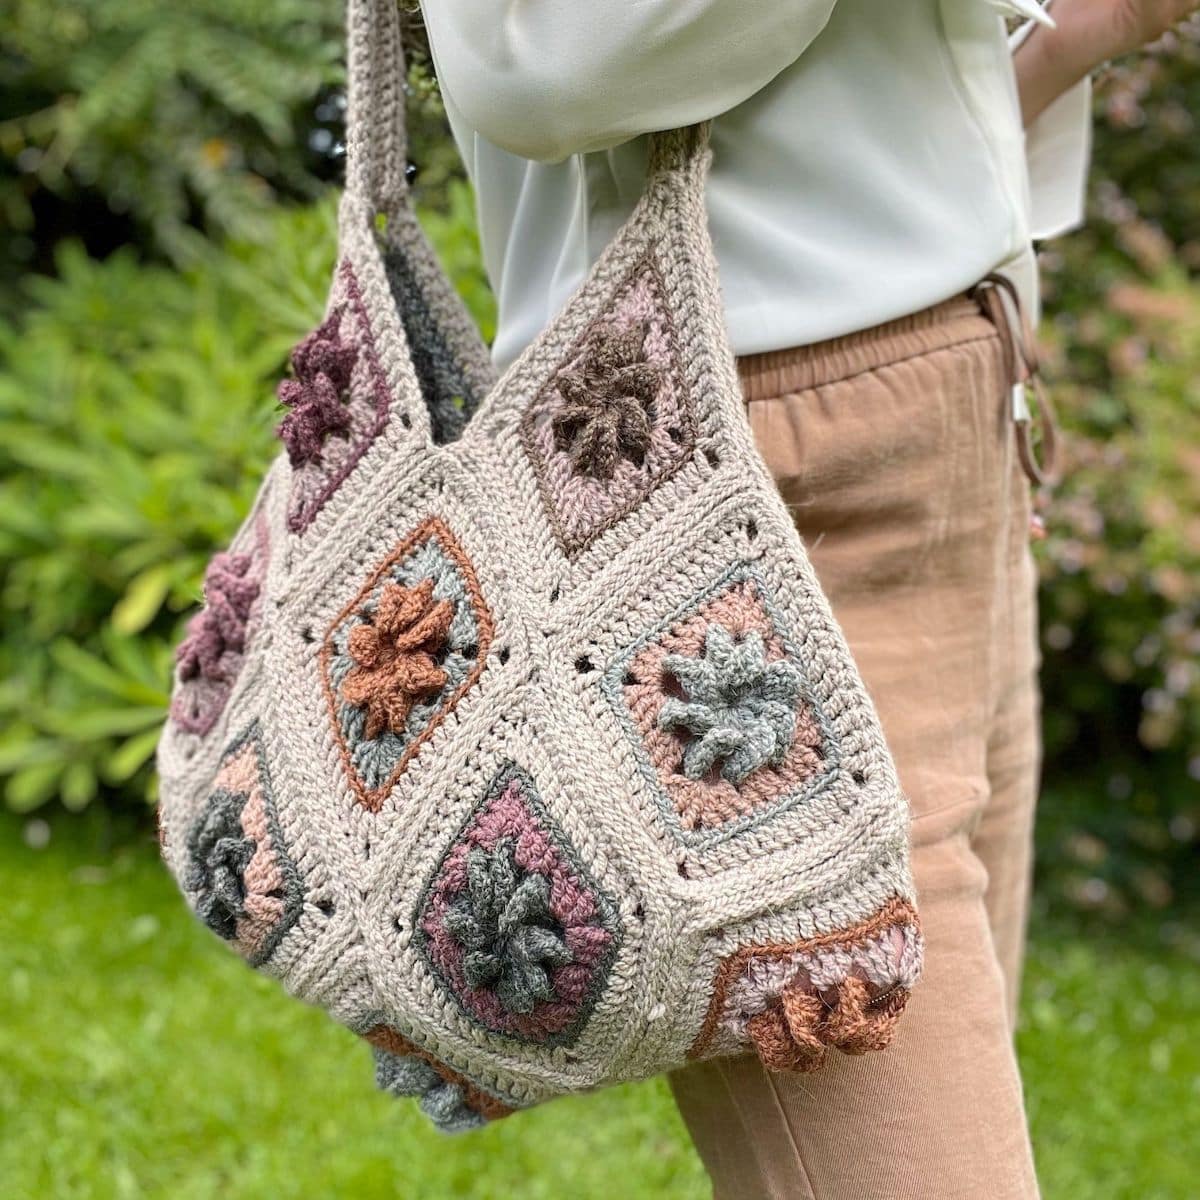 Free Bag Patterns: 40+ Sewing Patterns for Purses, Tote Bags, and More |  FaveCrafts.com